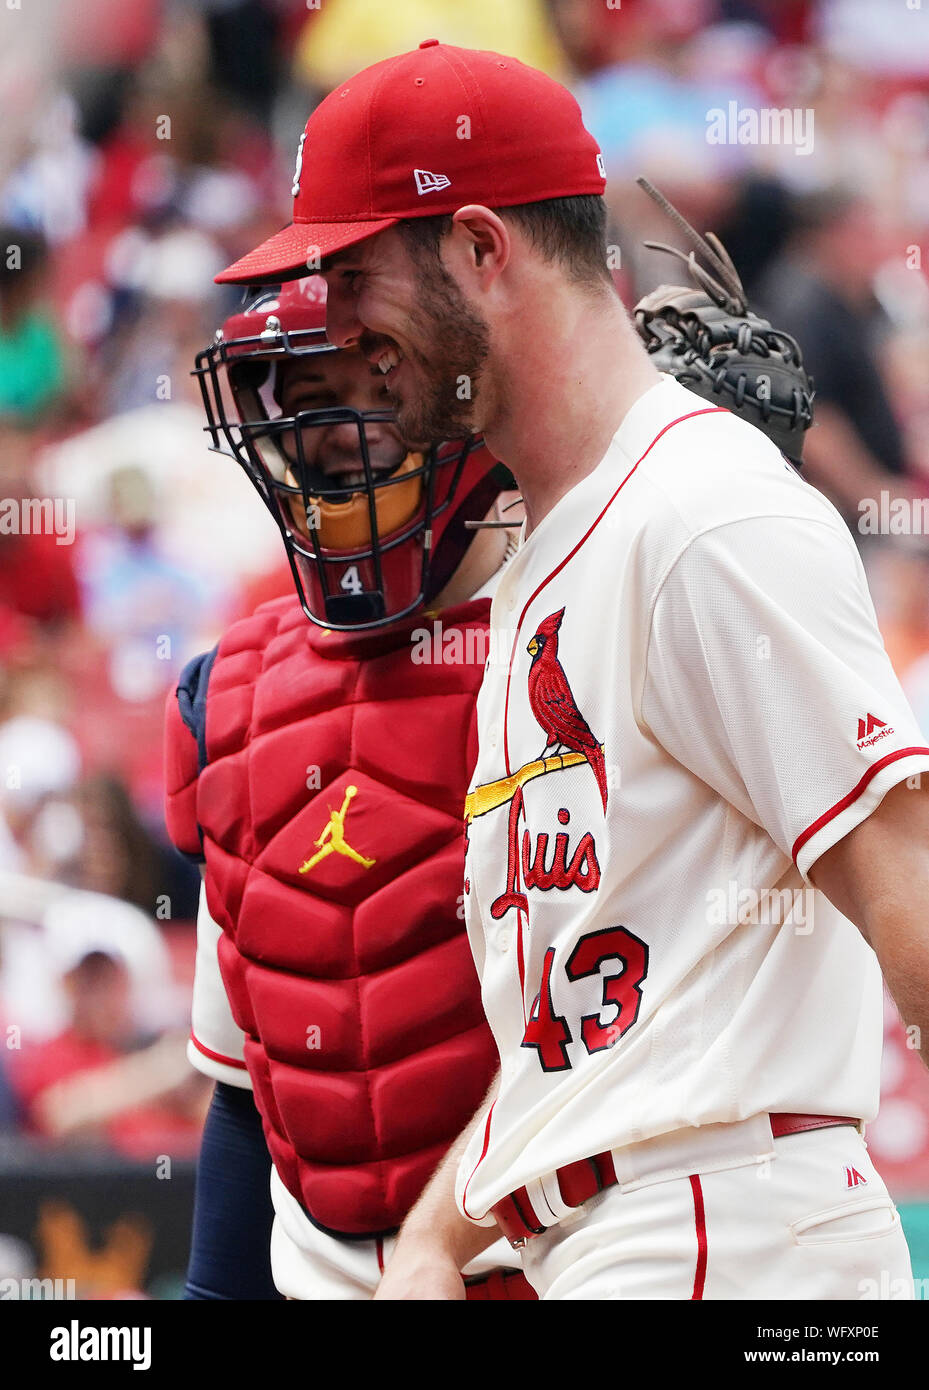 St. Louis Cardinals starting pitcher Dakota Hudson and catcher Yadier Molina smile as they leave the field after the third out of the seventh inning against the Cincinnati Reds at Busch Stadium in St. Louis on Saturday, August 31, 2019. St. Louis defeated Cincinnati 10-6.   Photo by Bill Greenblatt/UPI Stock Photo